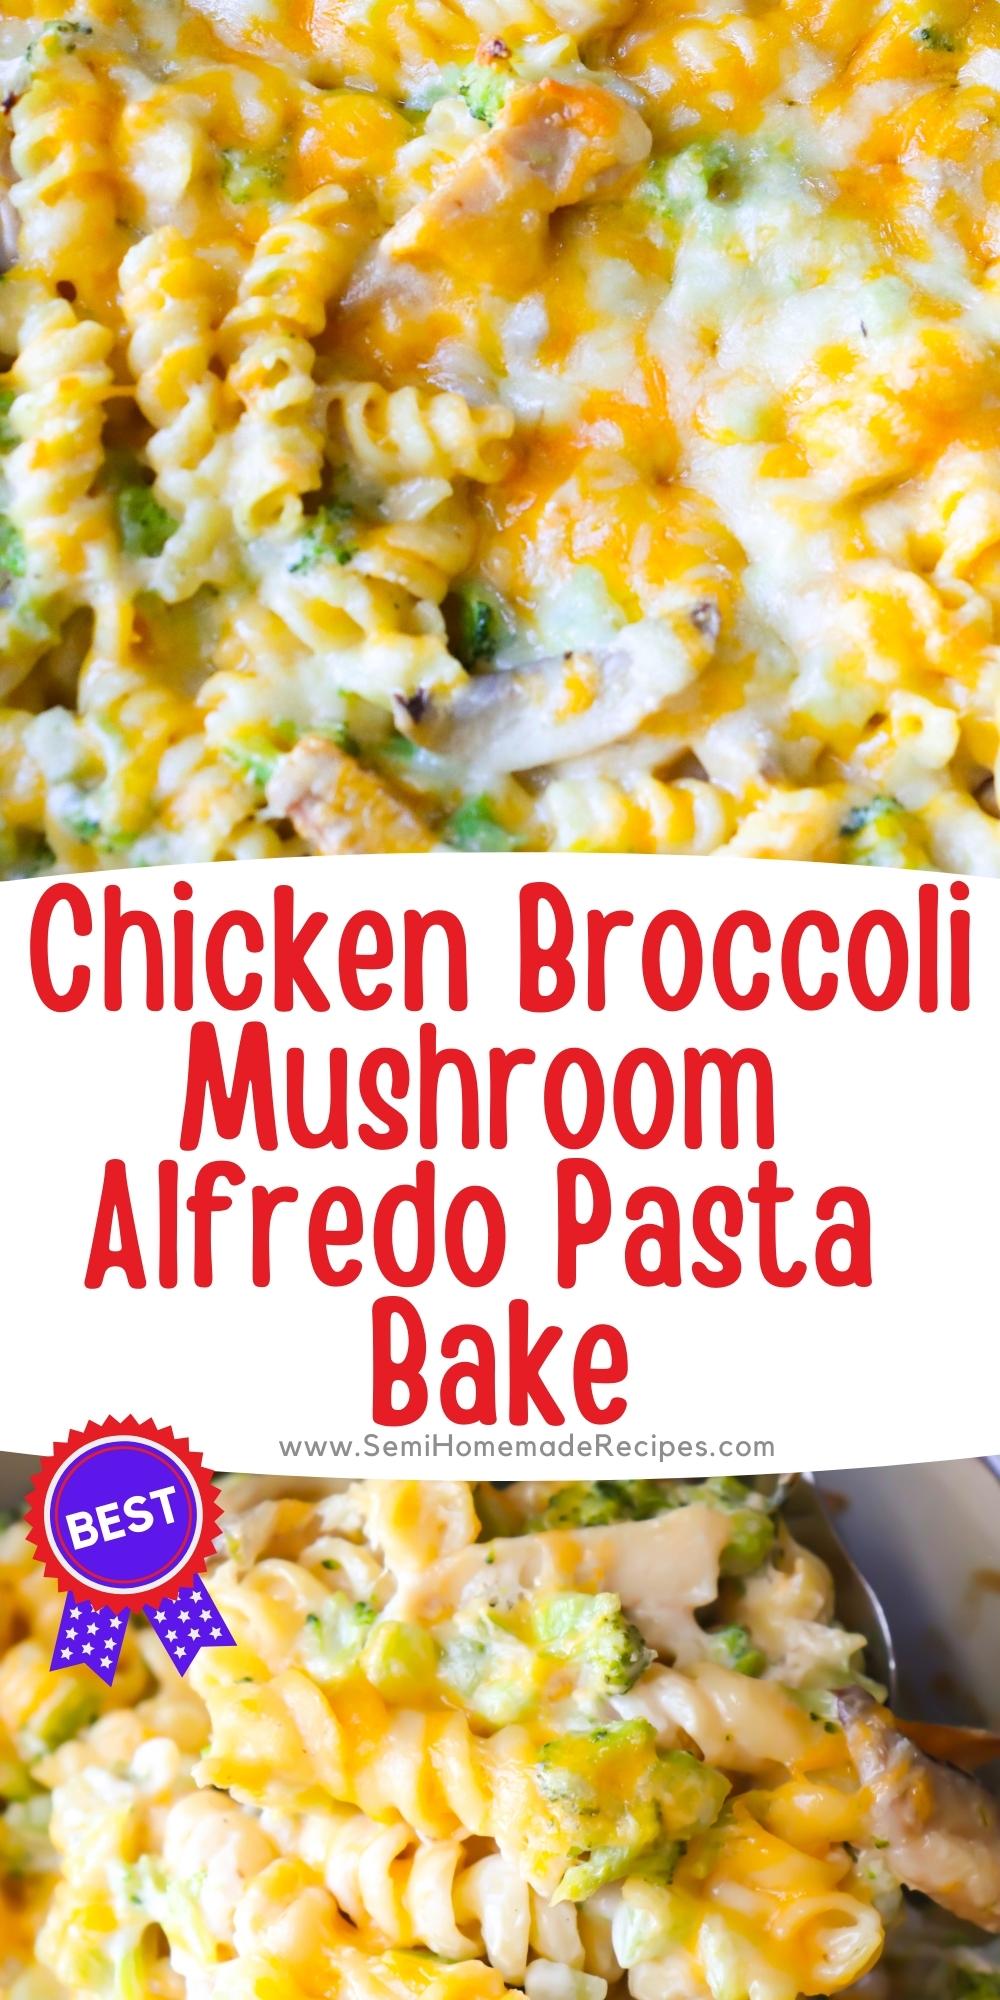 Chicken Broccoli Mushroom Alfredo Pasta Bake is a super simple semihomemade chicken alfredo casserole that is perfect for a busy weeknight! Lets get dinner on the table quickly so we can spend more time with our family! 